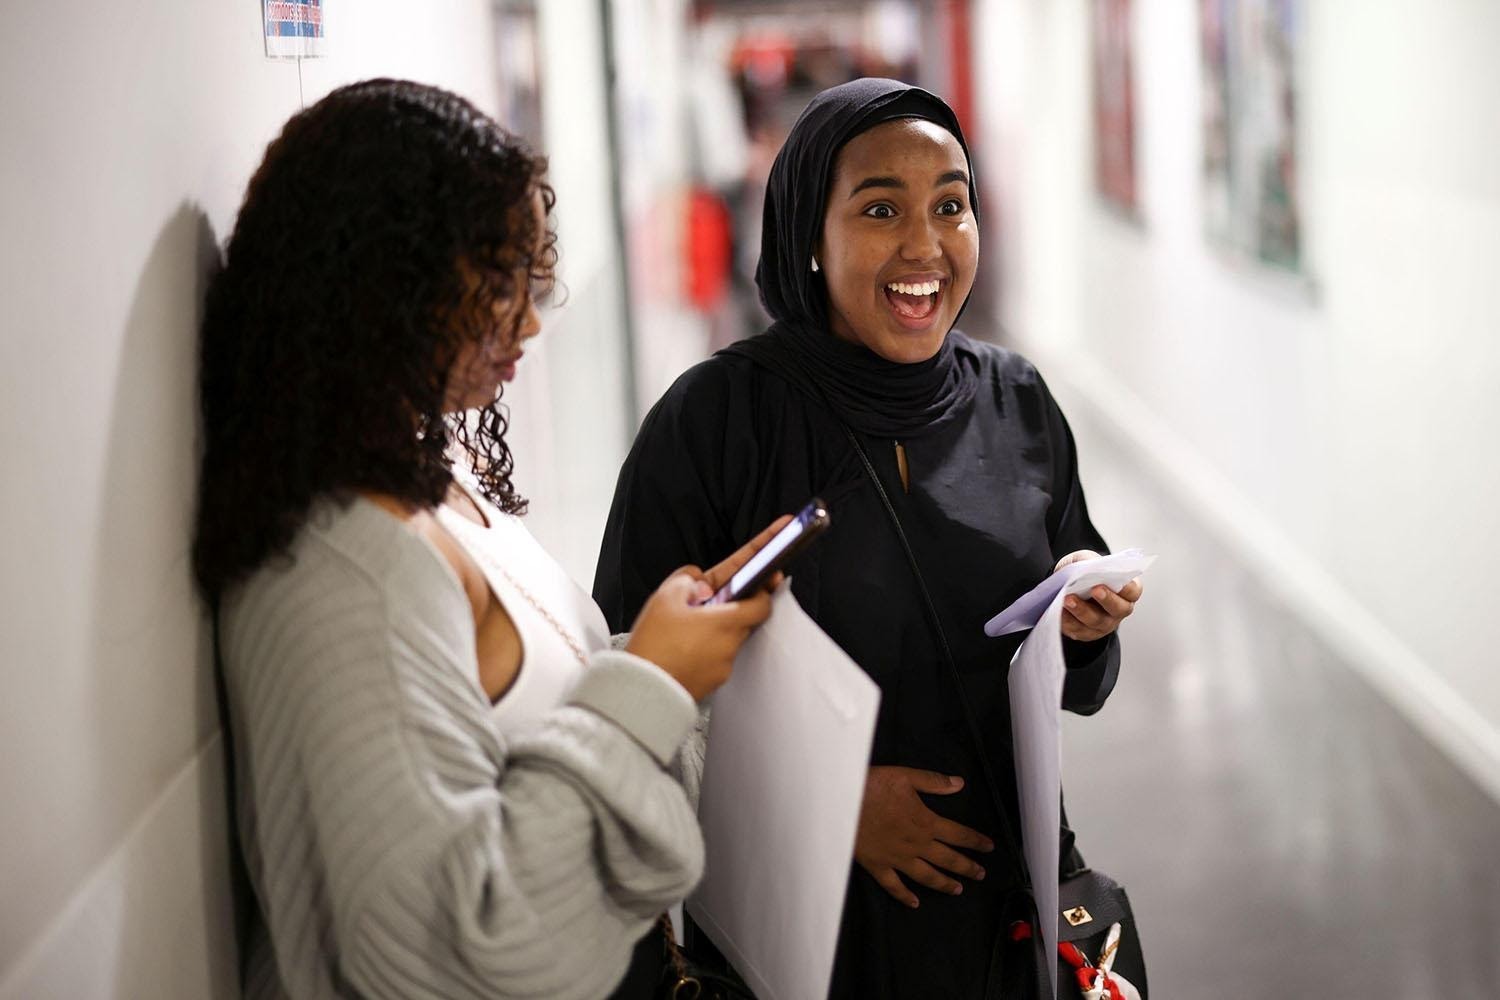 A-level students at the north London Ark Academy, which had 30 per cent of grades at A*/A